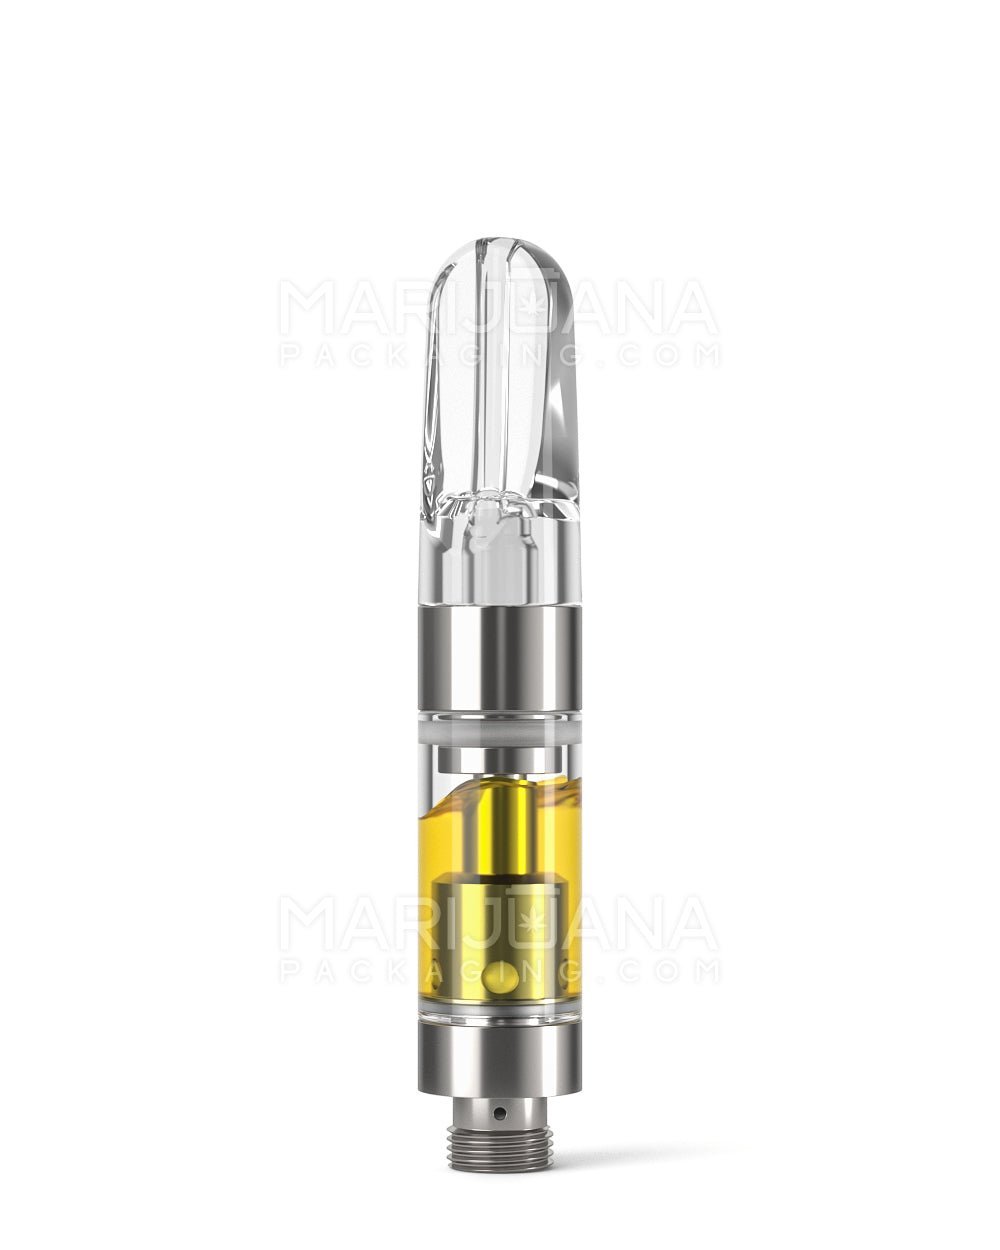 Ceramic Core Glass Vape Cartridge with Flat Clear Plastic Mouthpiece | 0.5mL - Press On - 100 Count - 2